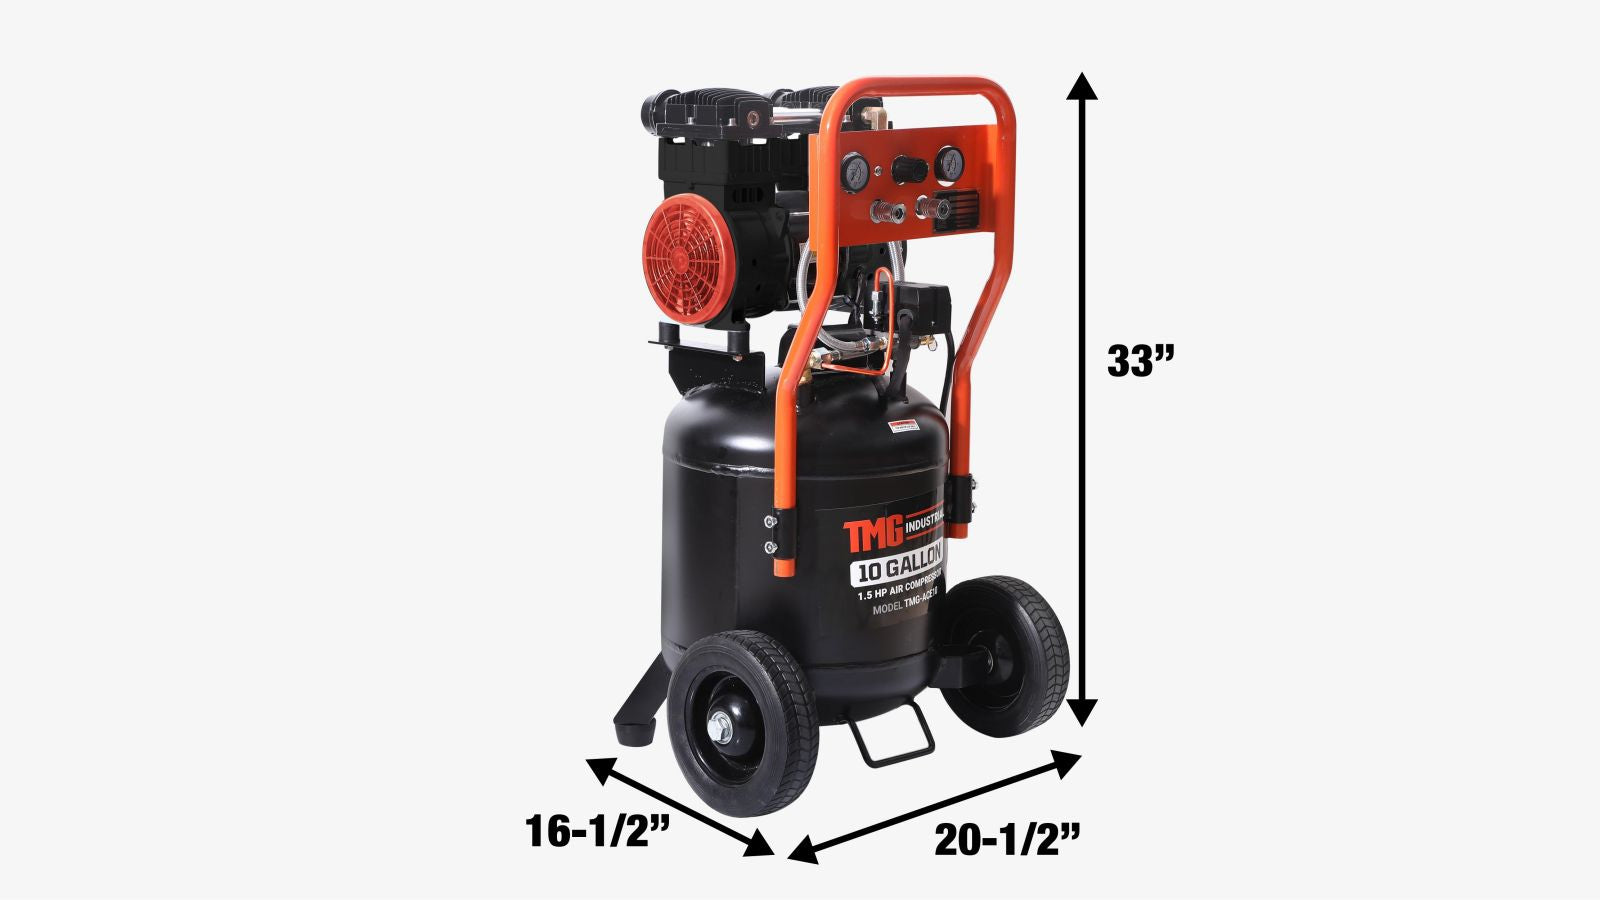 TMG Industrial 10 Gallon 1.5 HP Electric Air Compressor, Oil-Free Dual Piston Pump, 3 Min Fill Time, ASME Vertical Tank, TMG-ACE10-specifications-image